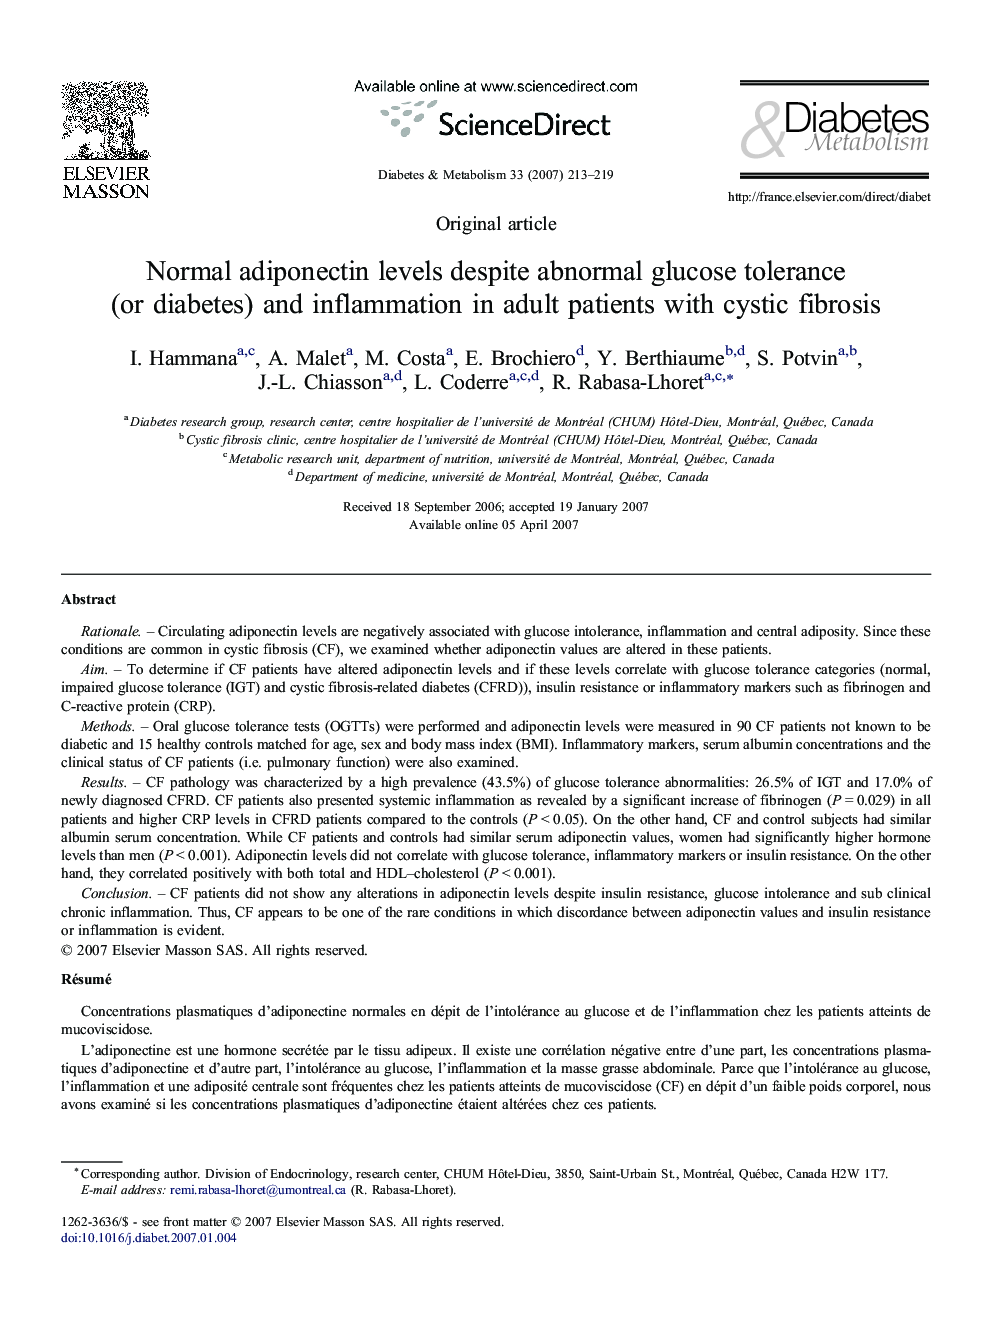 Normal adiponectin levels despite abnormal glucose tolerance (or diabetes) and inflammation in adult patients with cystic fibrosis